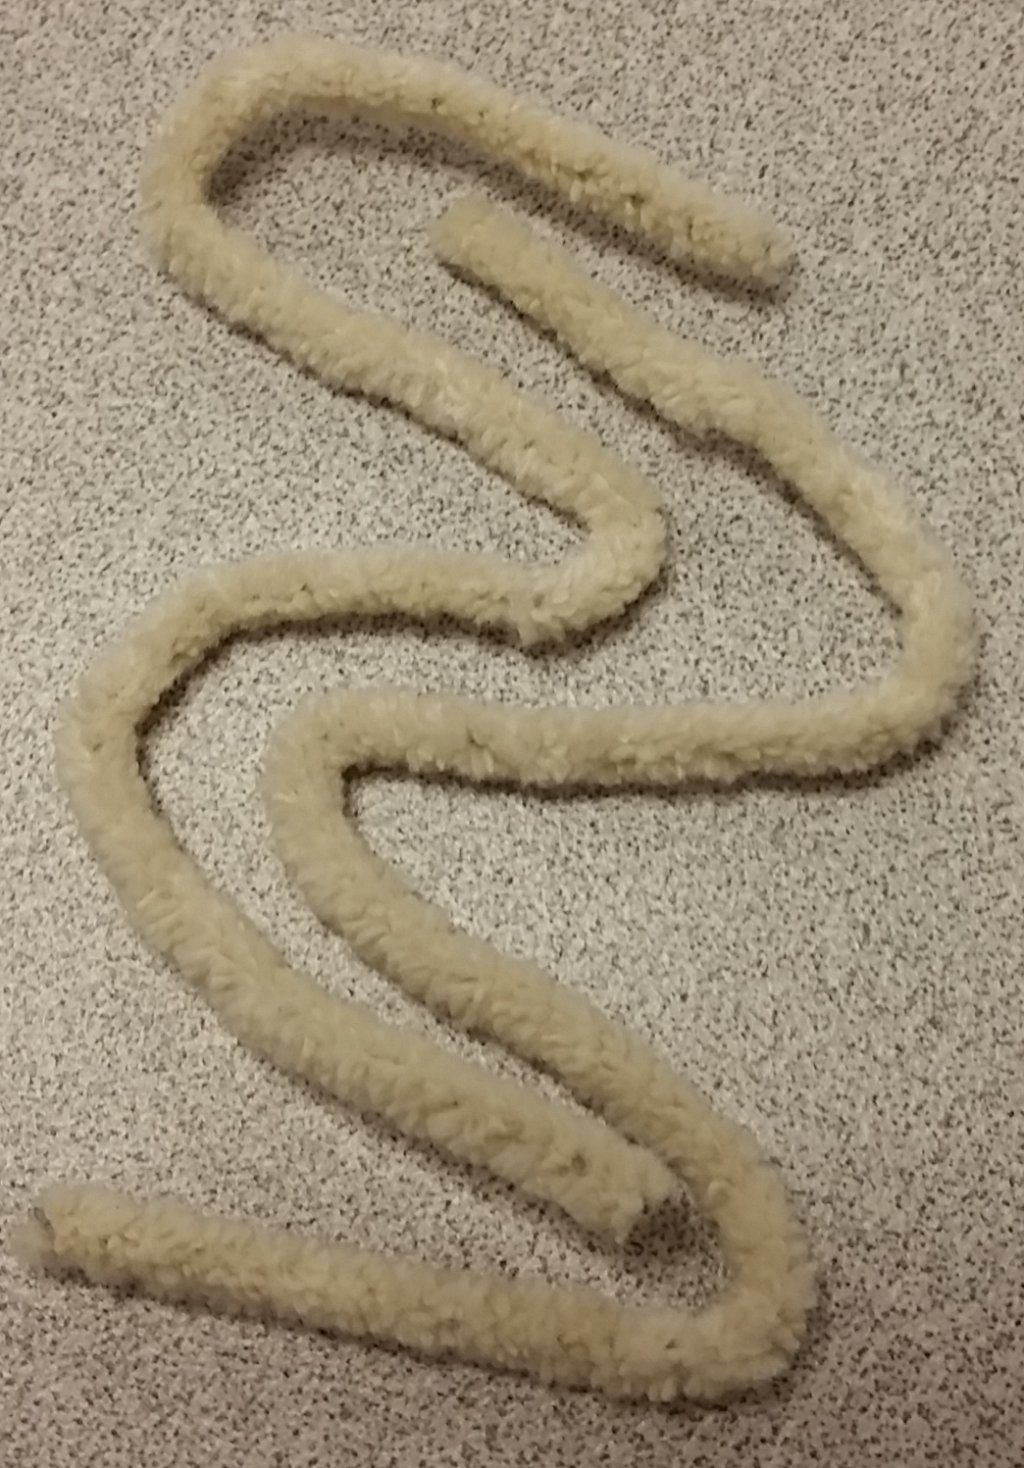 intertwined pipe cleaners